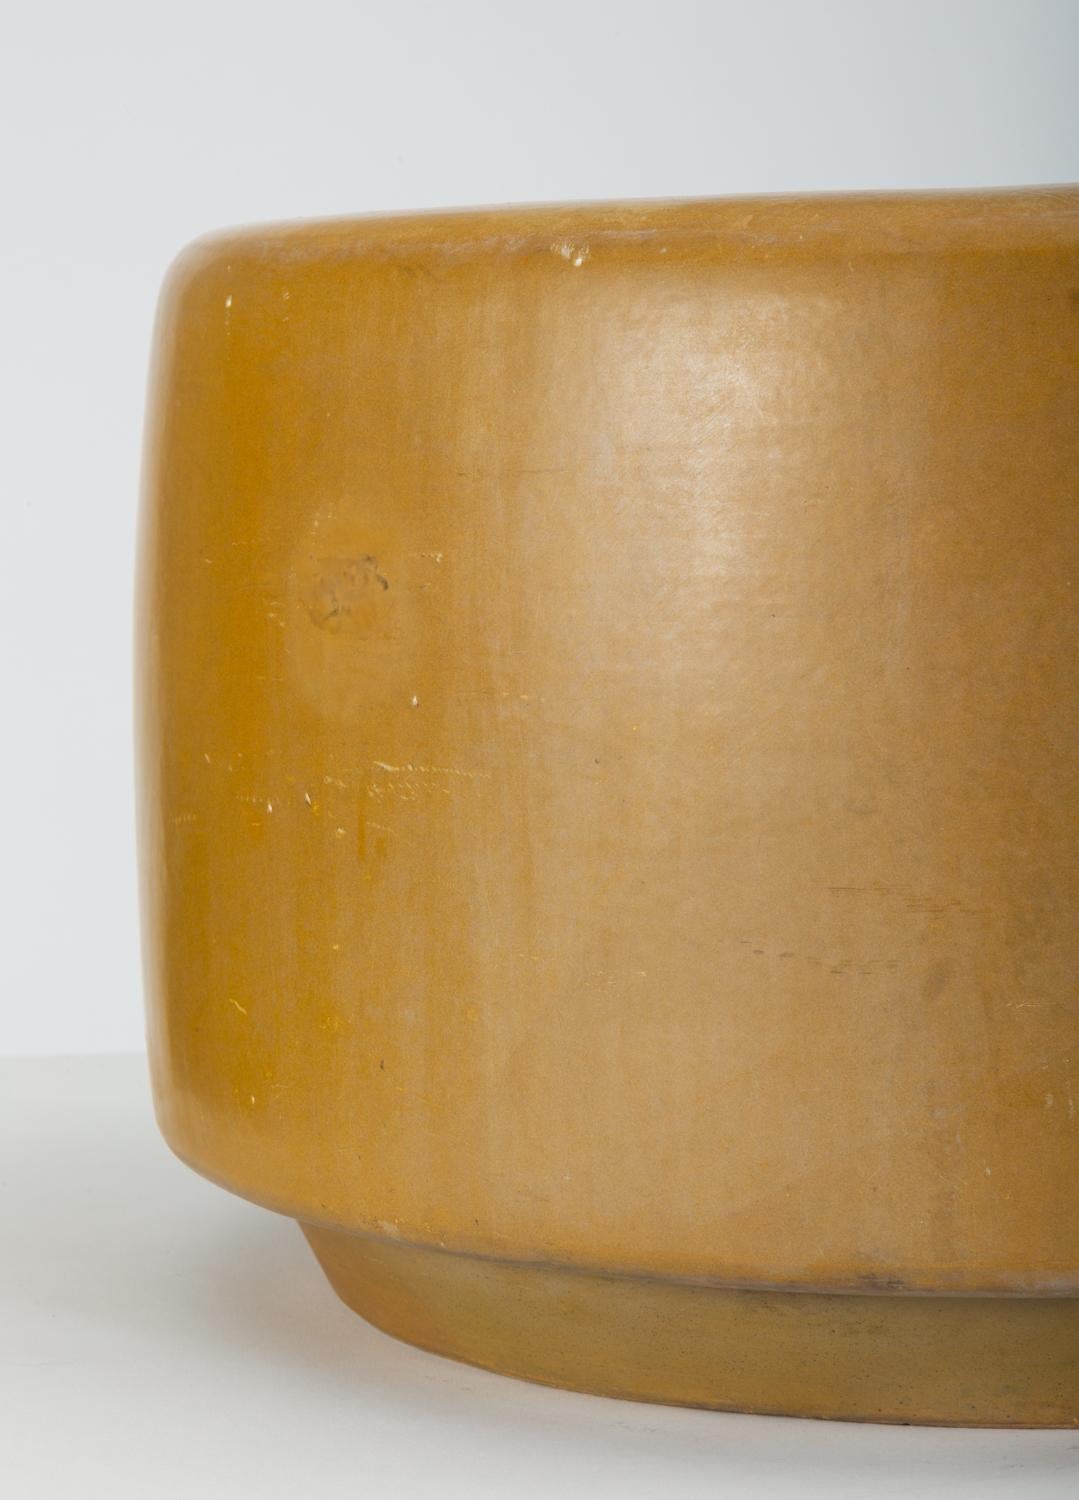 Ceramic CP-17 Tire Planter by John Follis for Architectural Pottery in Yellow Glaze